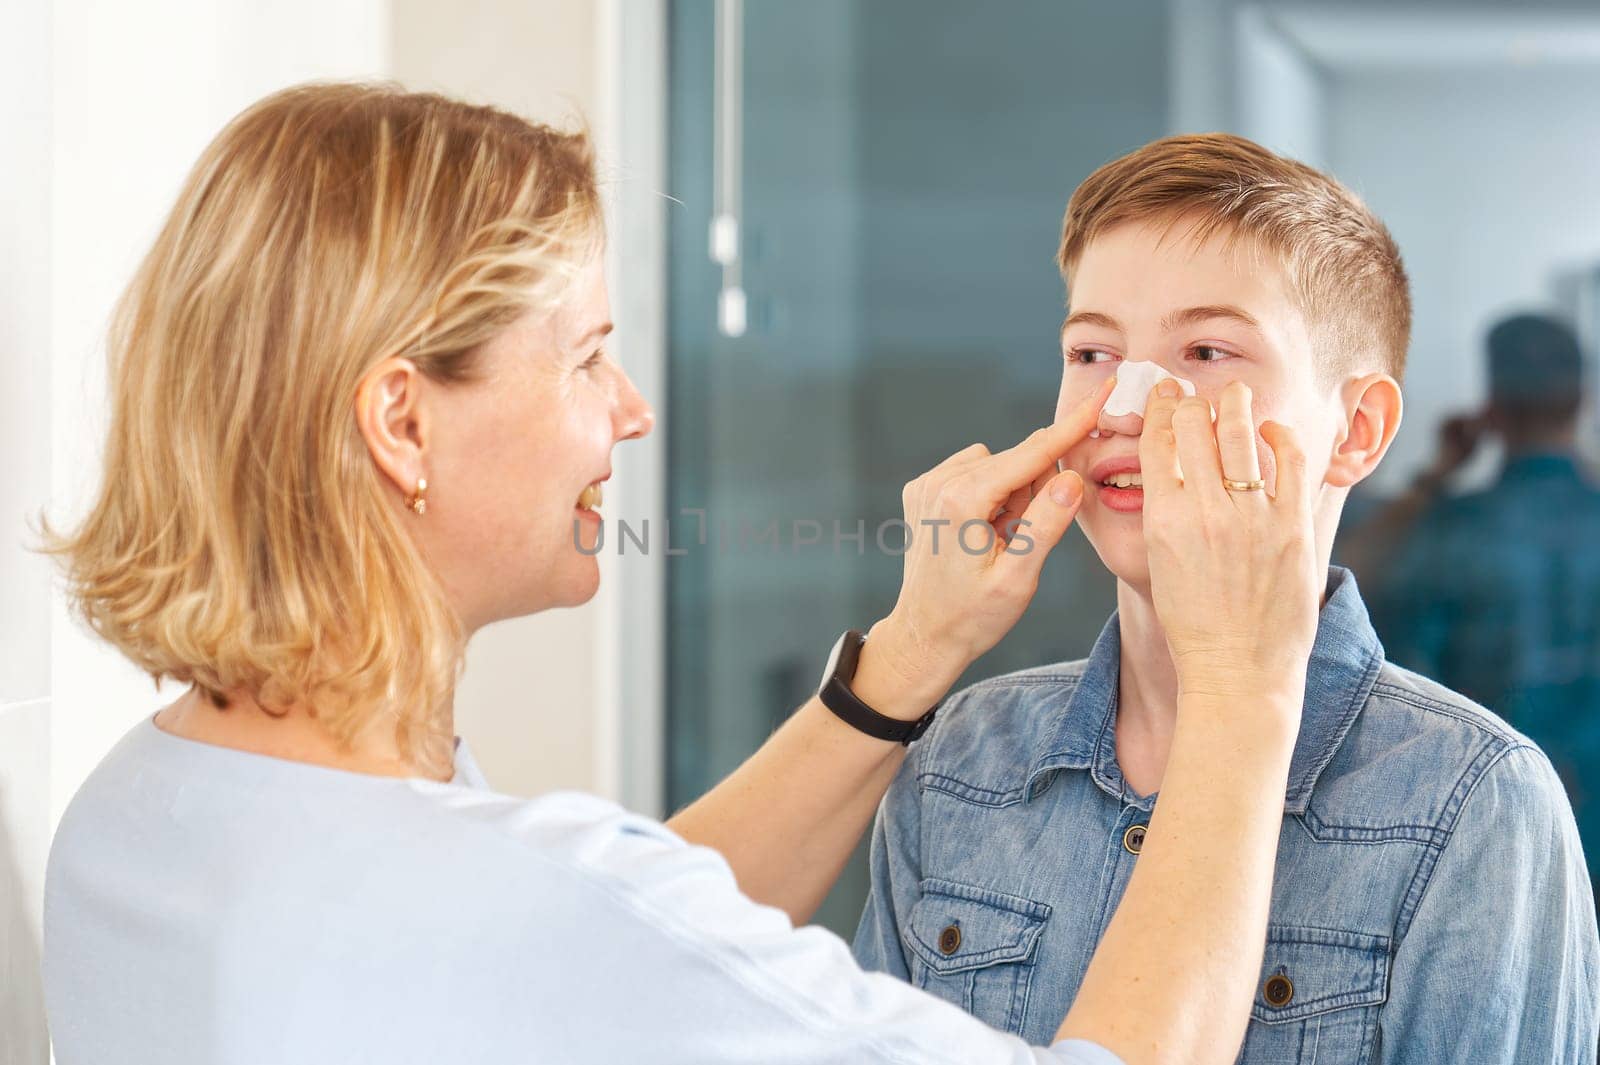 mom glues a patch to remove blackheads to her son. acne remover patch. teenage with nose band aid